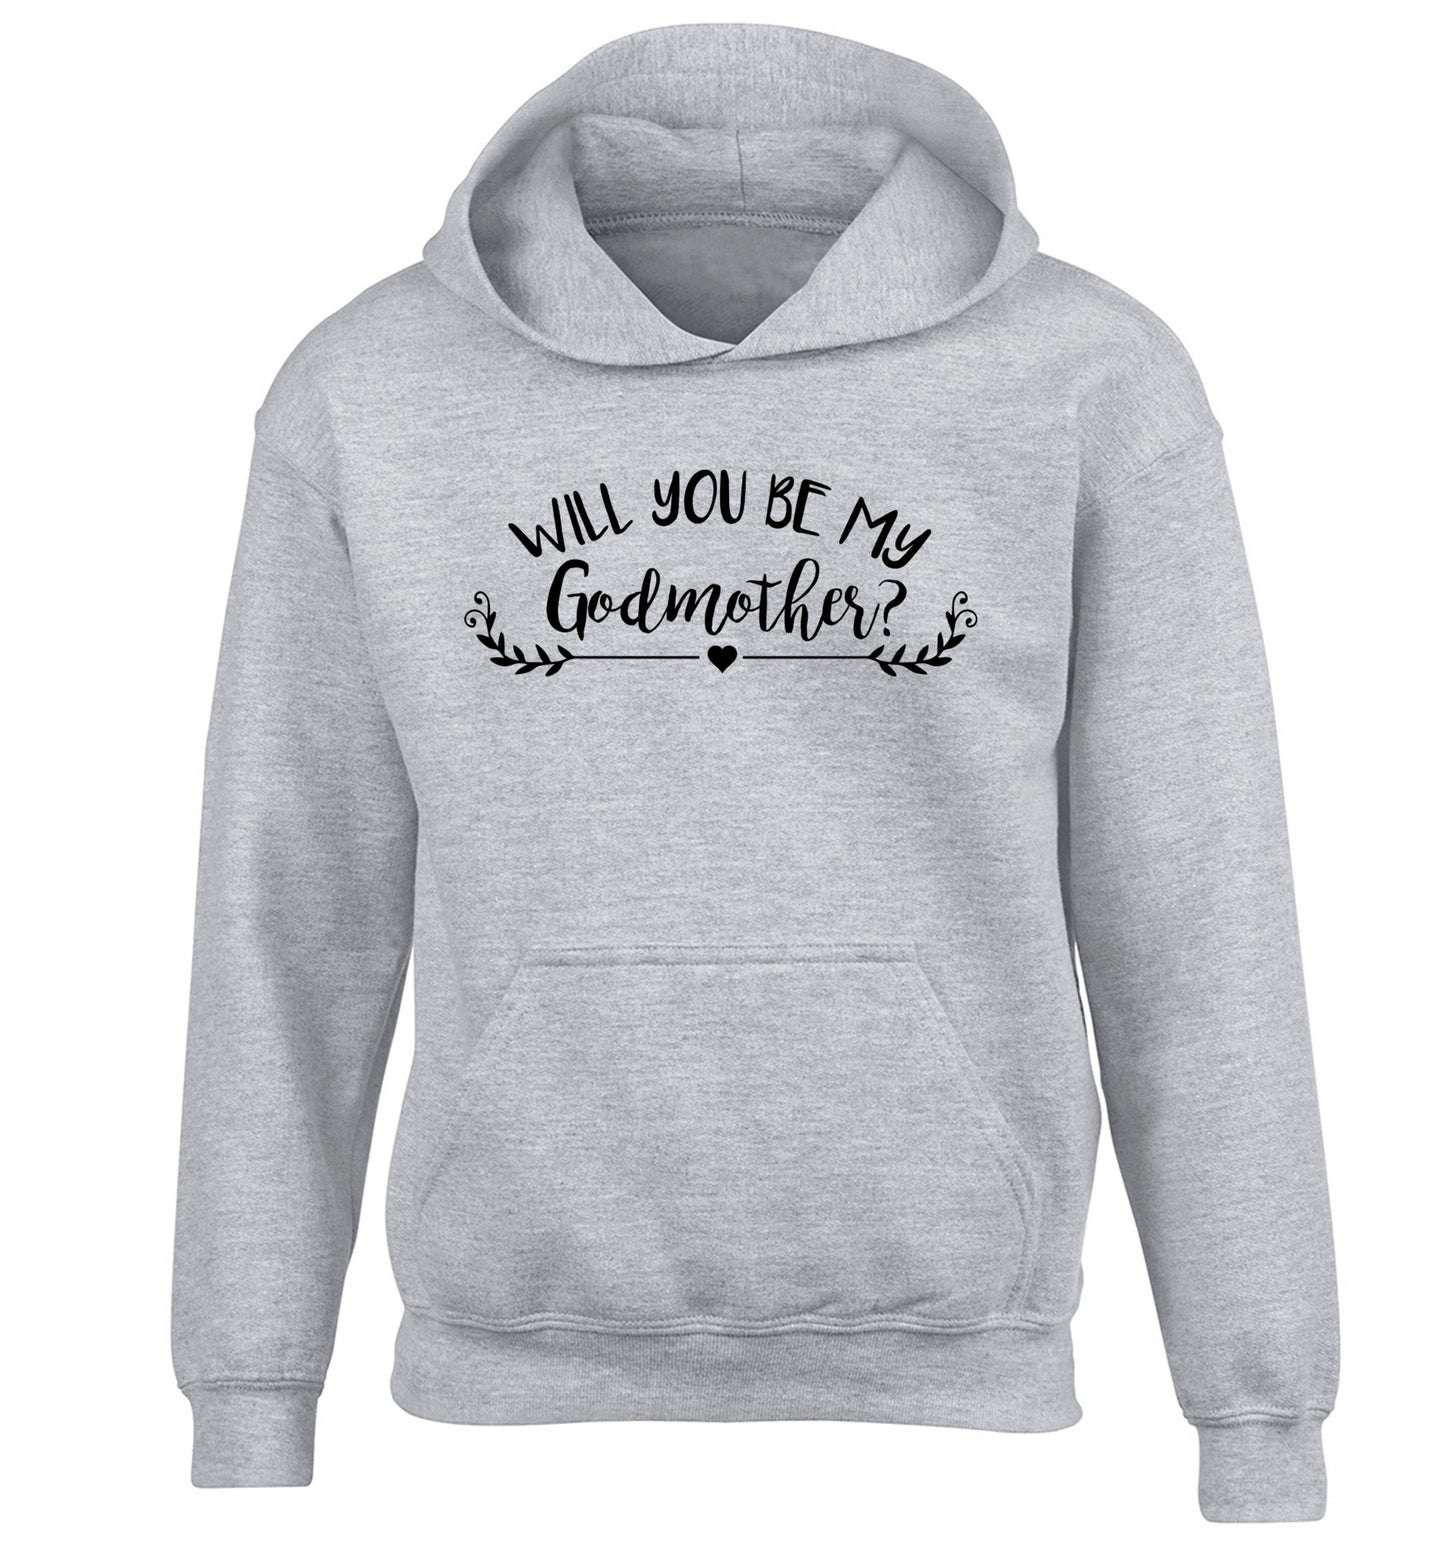 Will you be my godmother? children's grey hoodie 12-14 Years